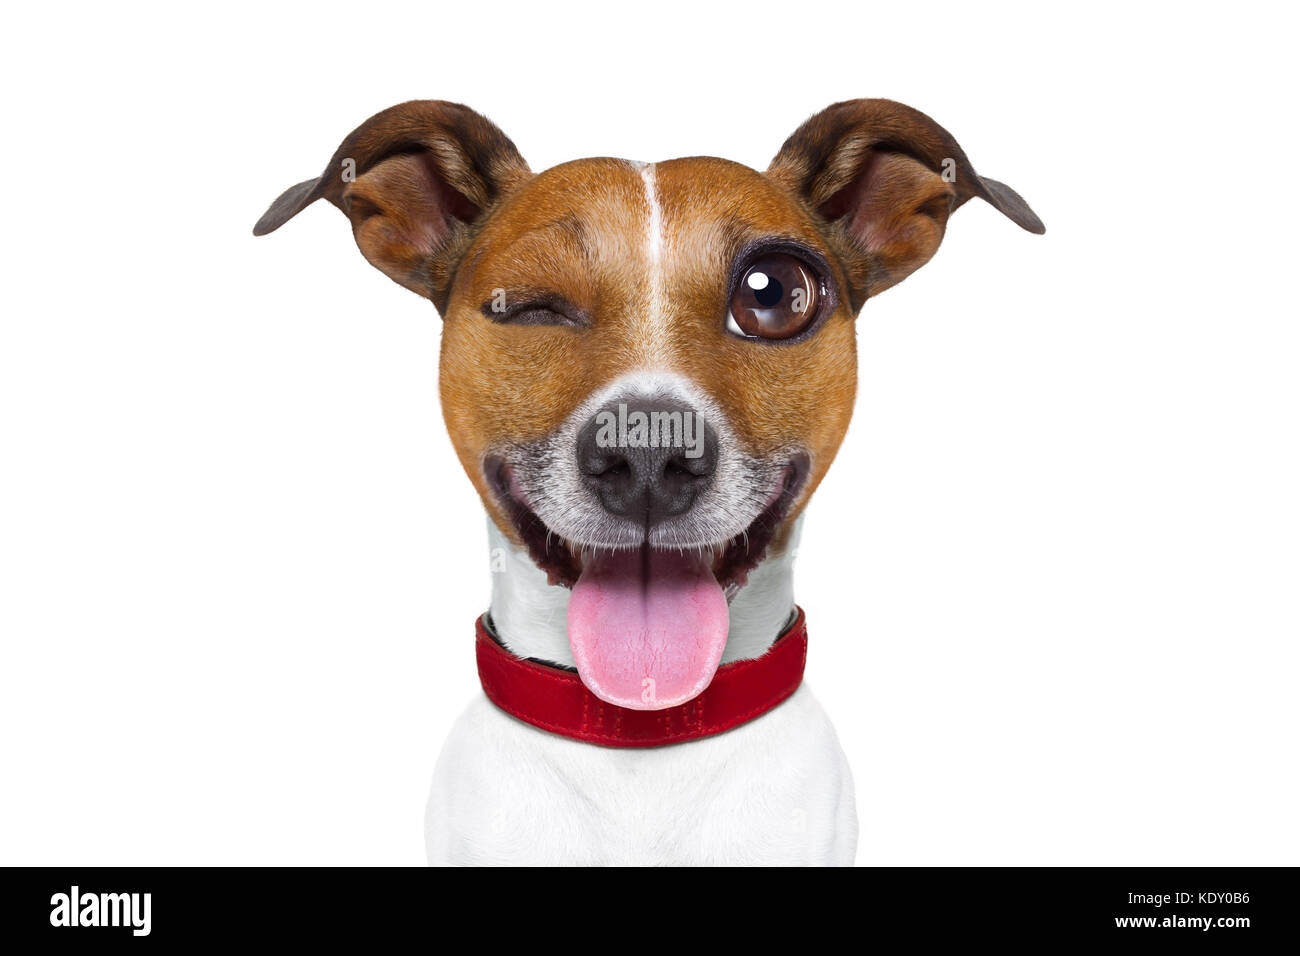 jack russell terrier emoticon or emoji dog funny silly crazy and dumb sticking out the tongue, isolated on white background Stock Photo